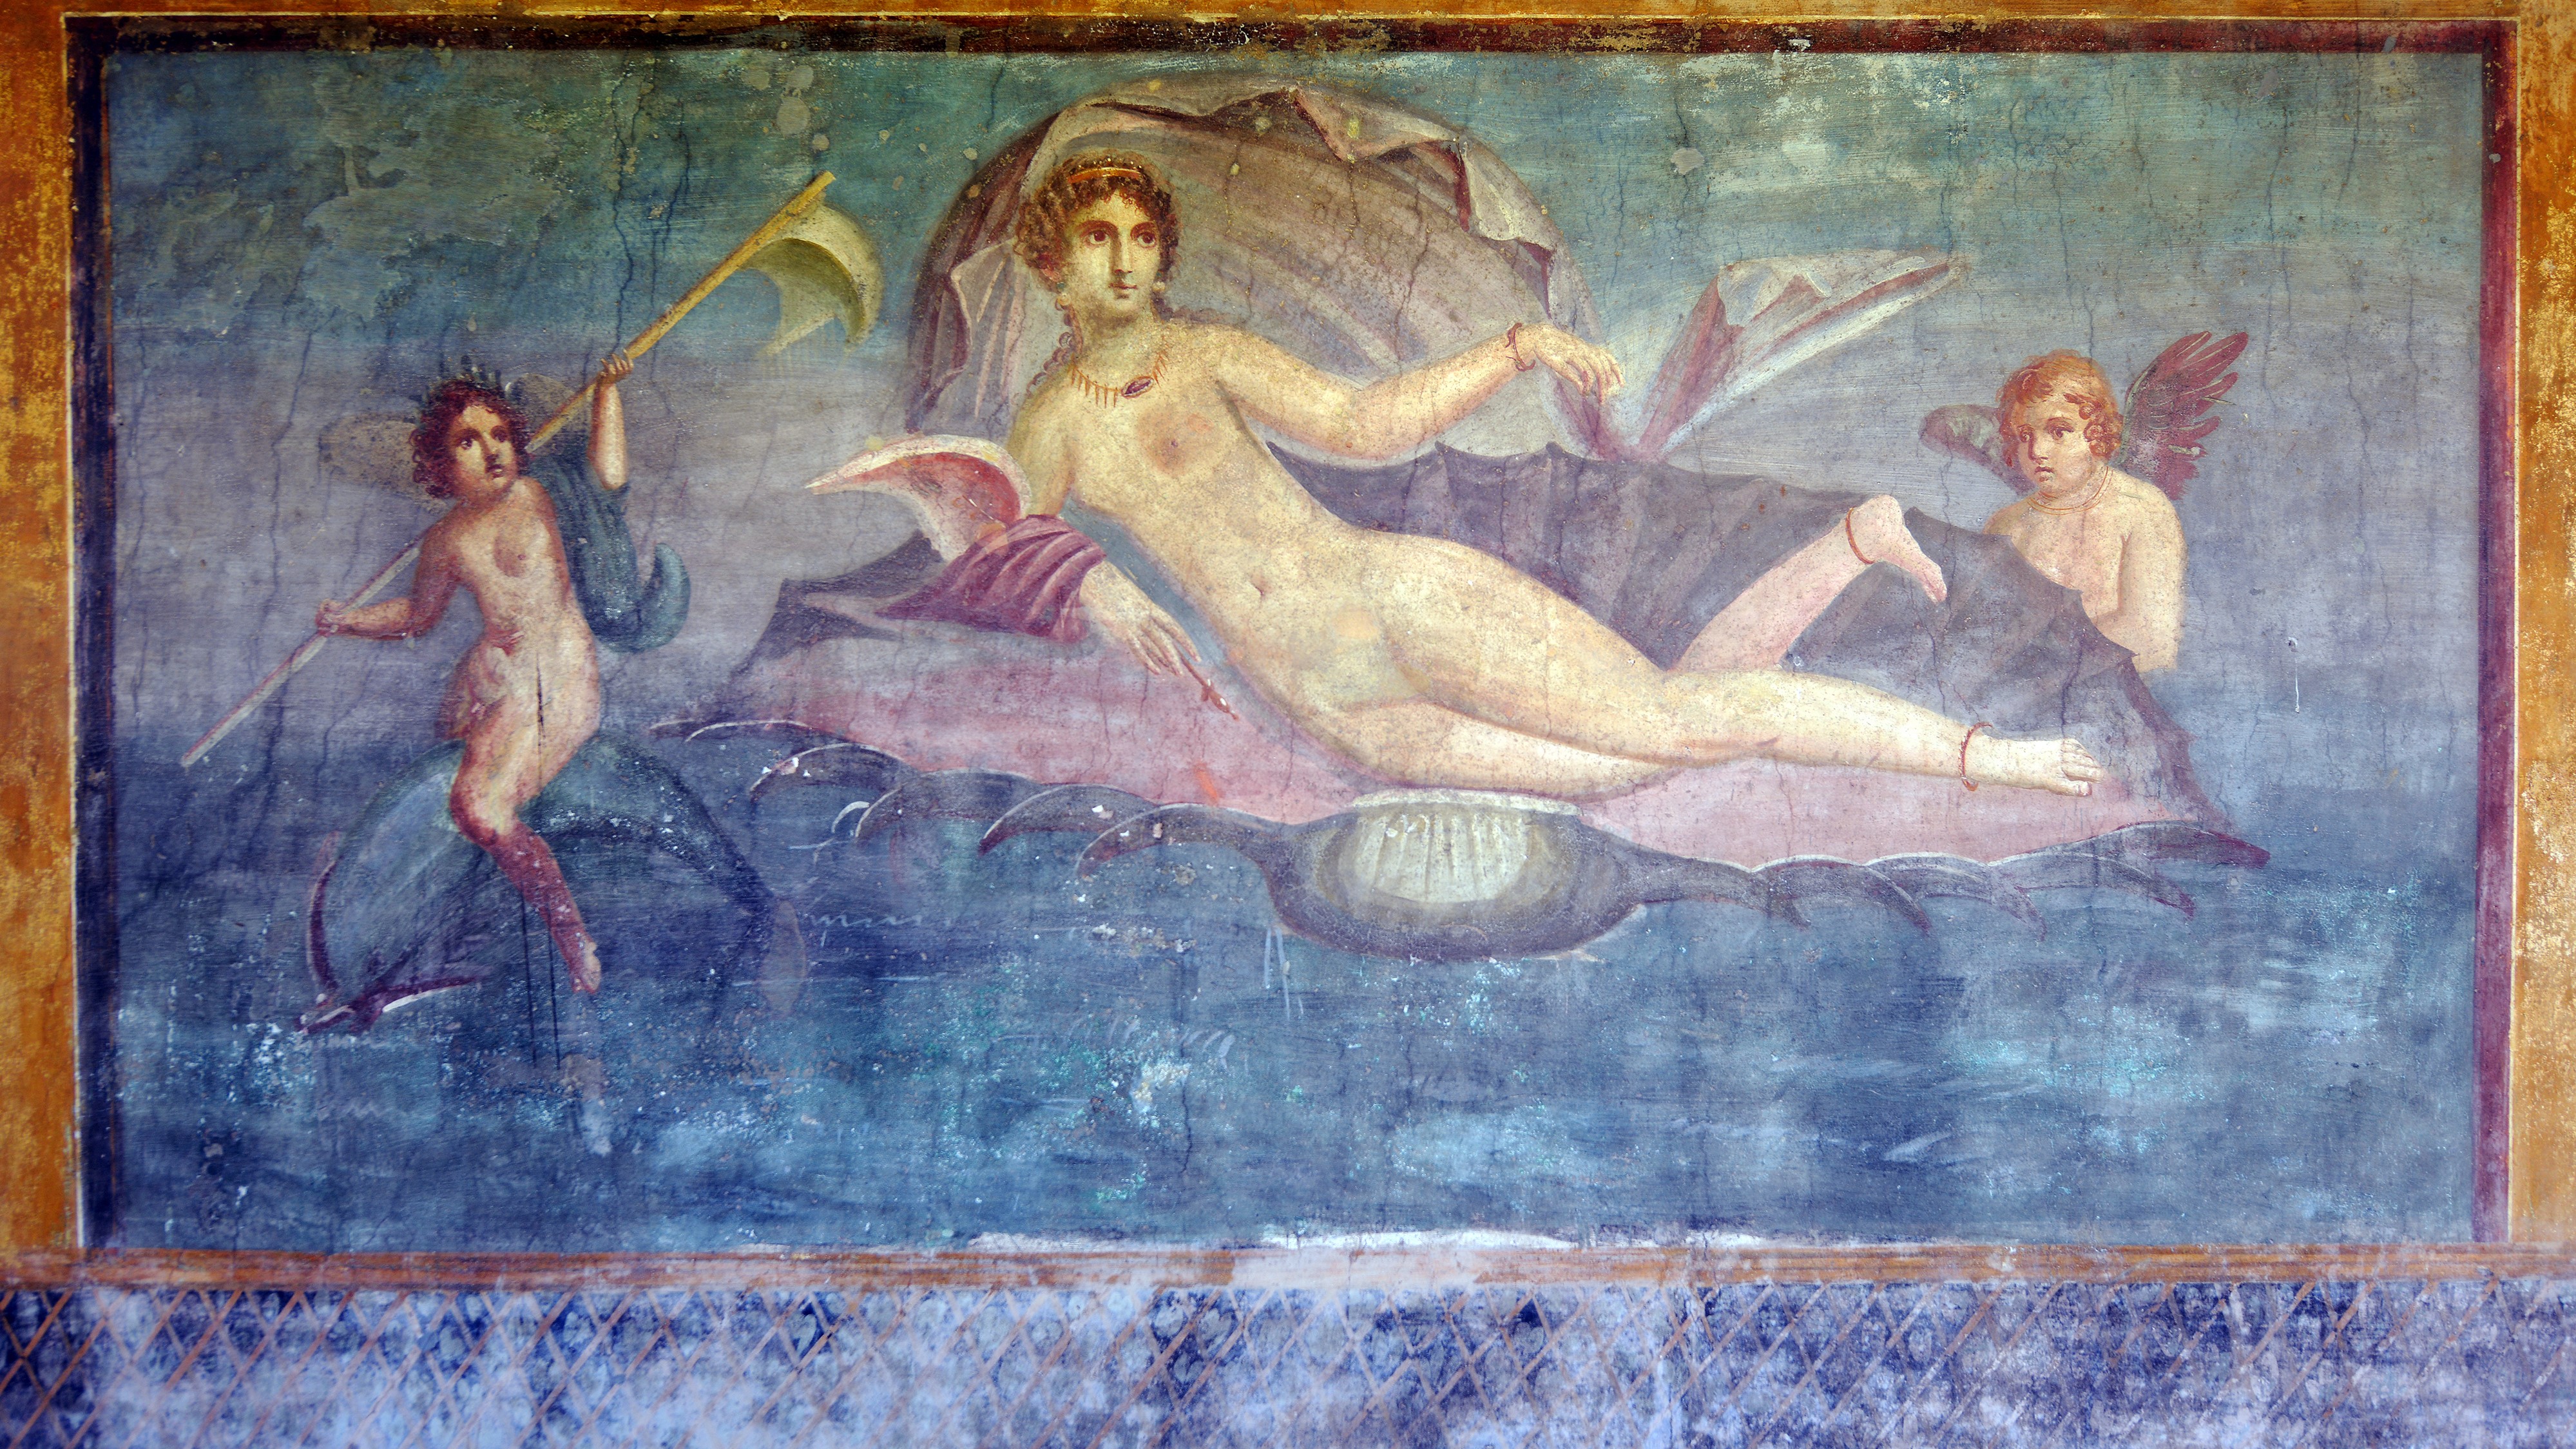 A mural decorating a wall features Venus on a half shell with Cupid and a nereid on a dolphin.